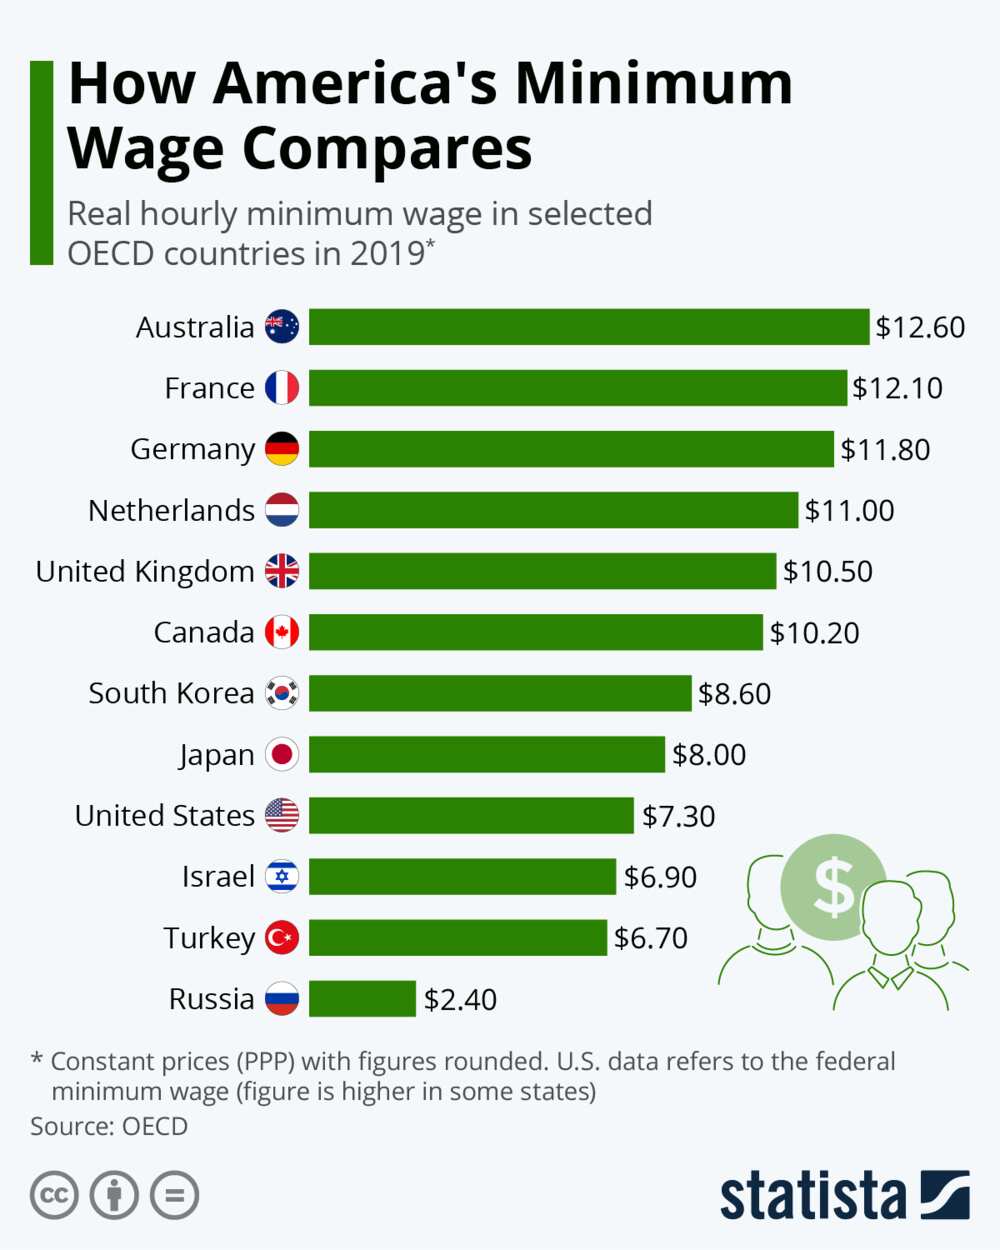 Nigeria's minimum wage compared with 13 other countries